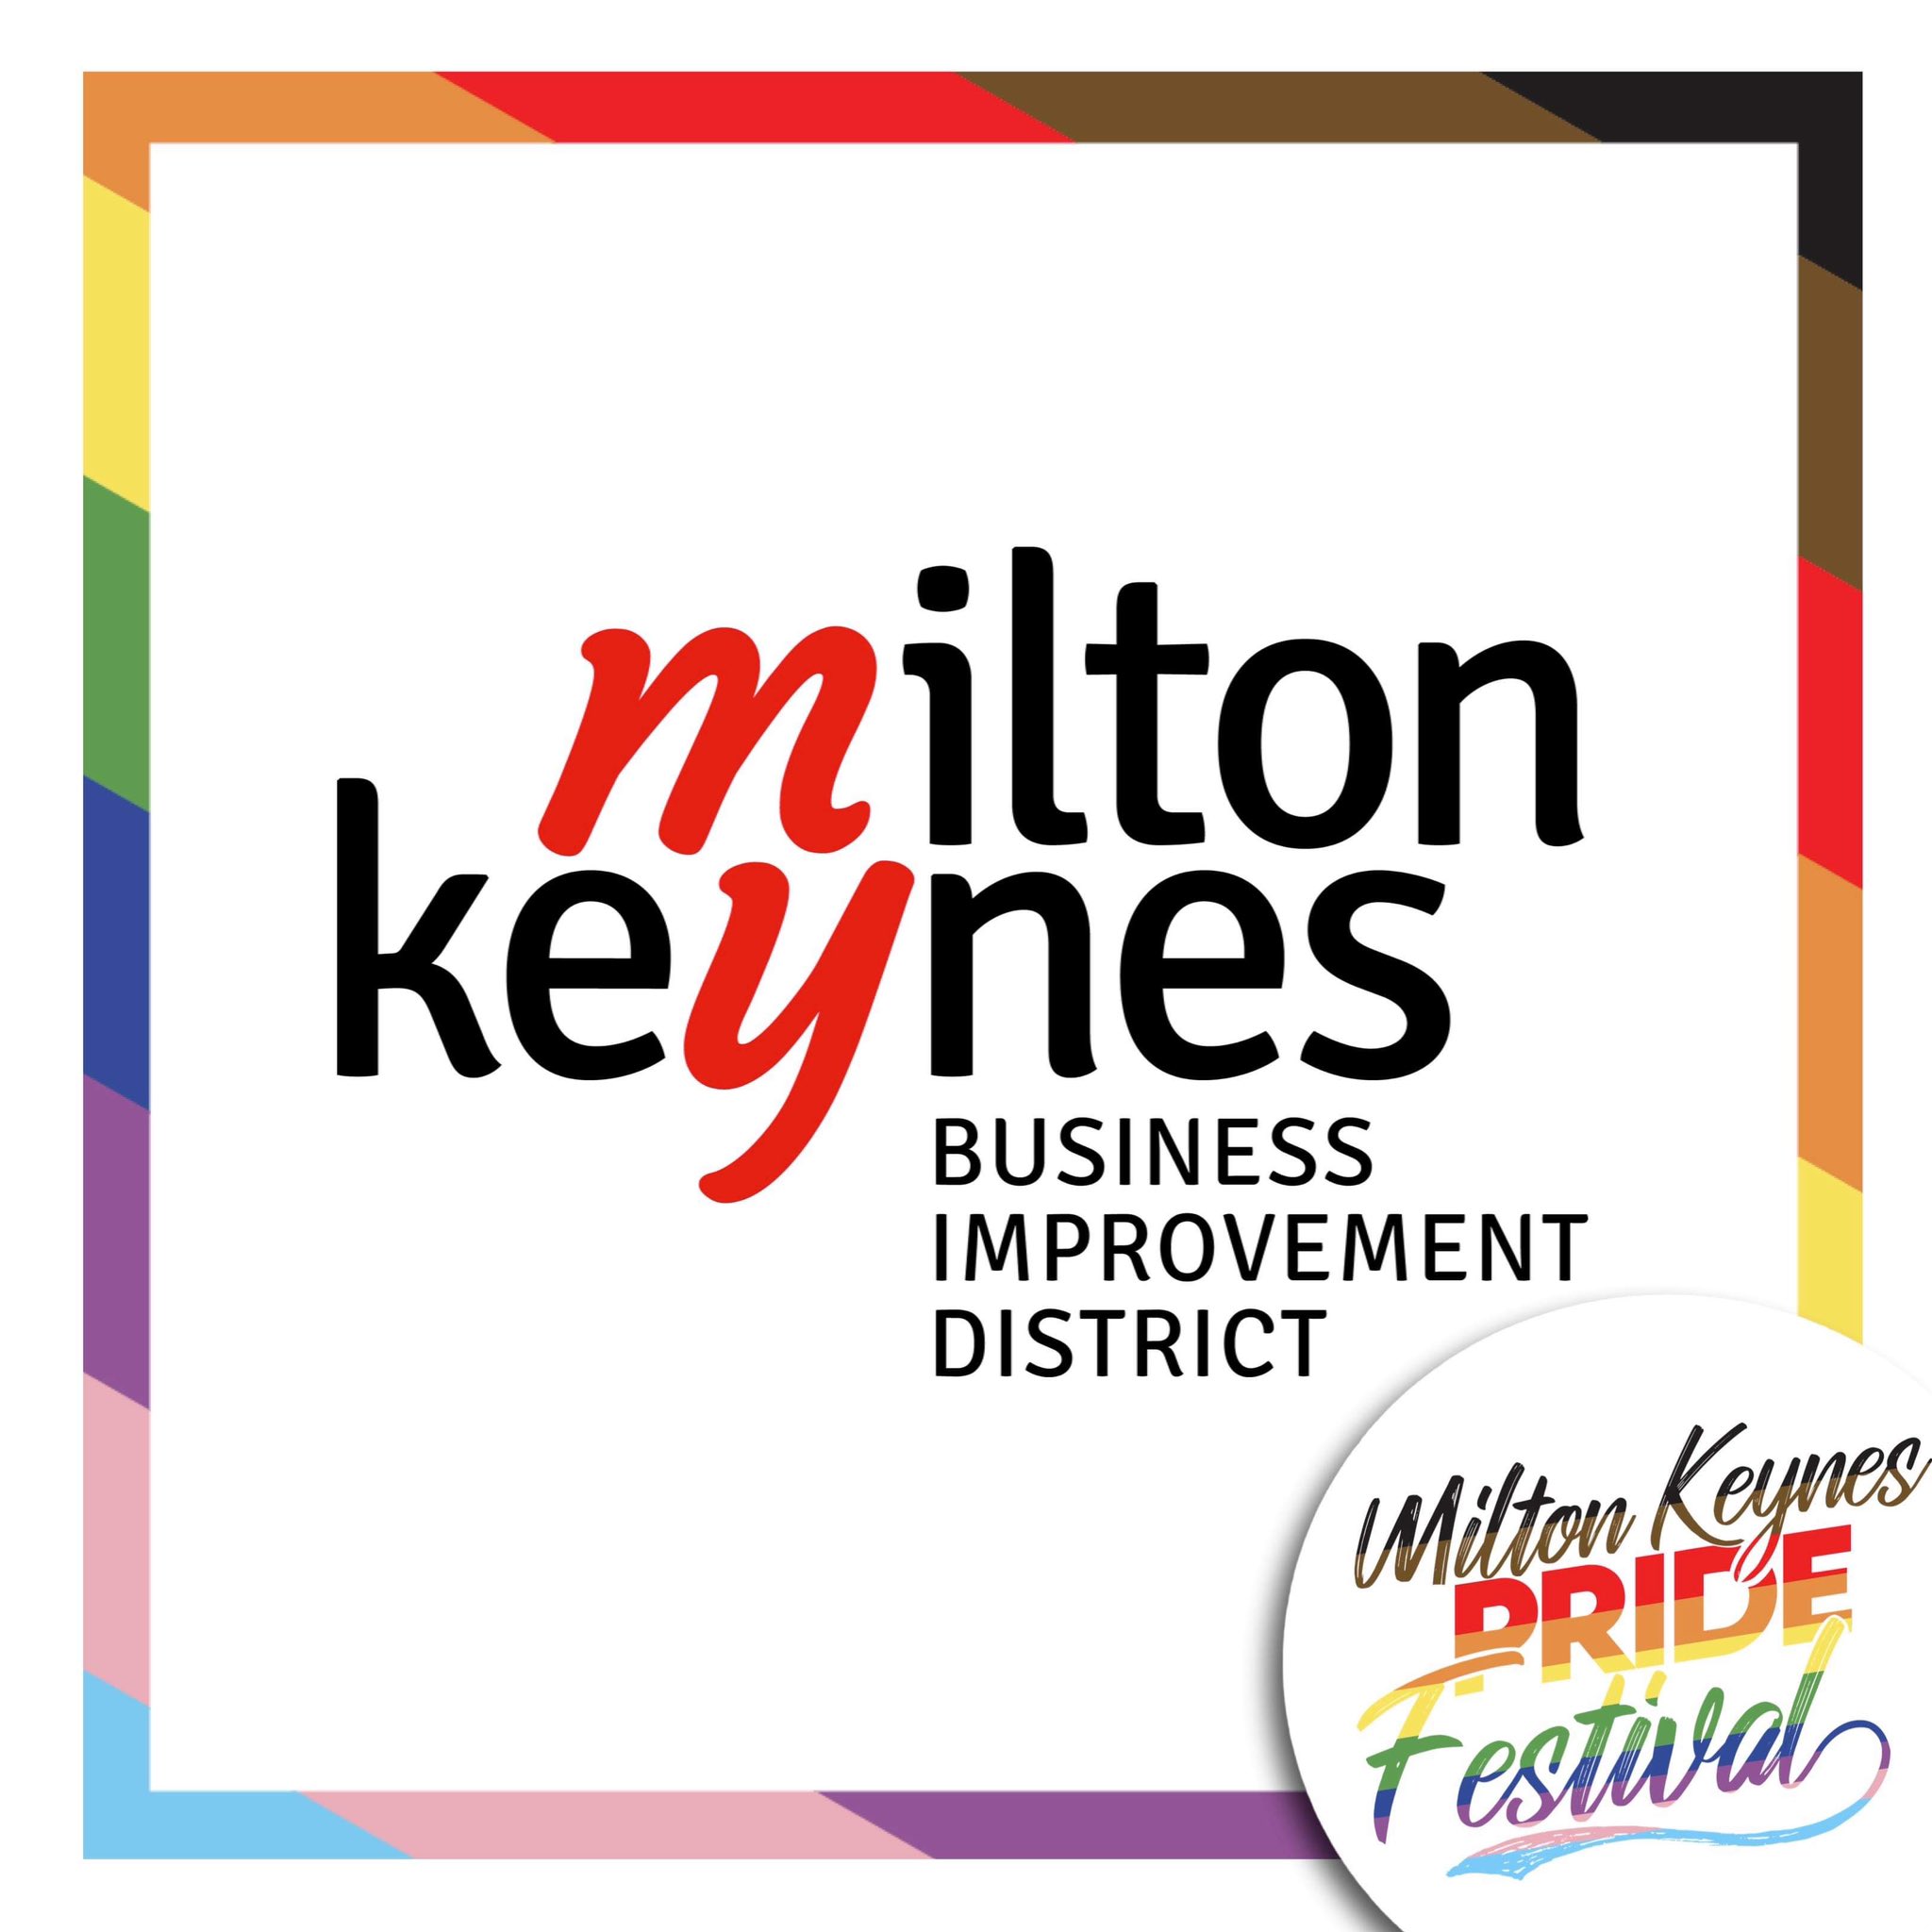 MyMiltonKeynes to create trail of rainbows in support of Pride Festival